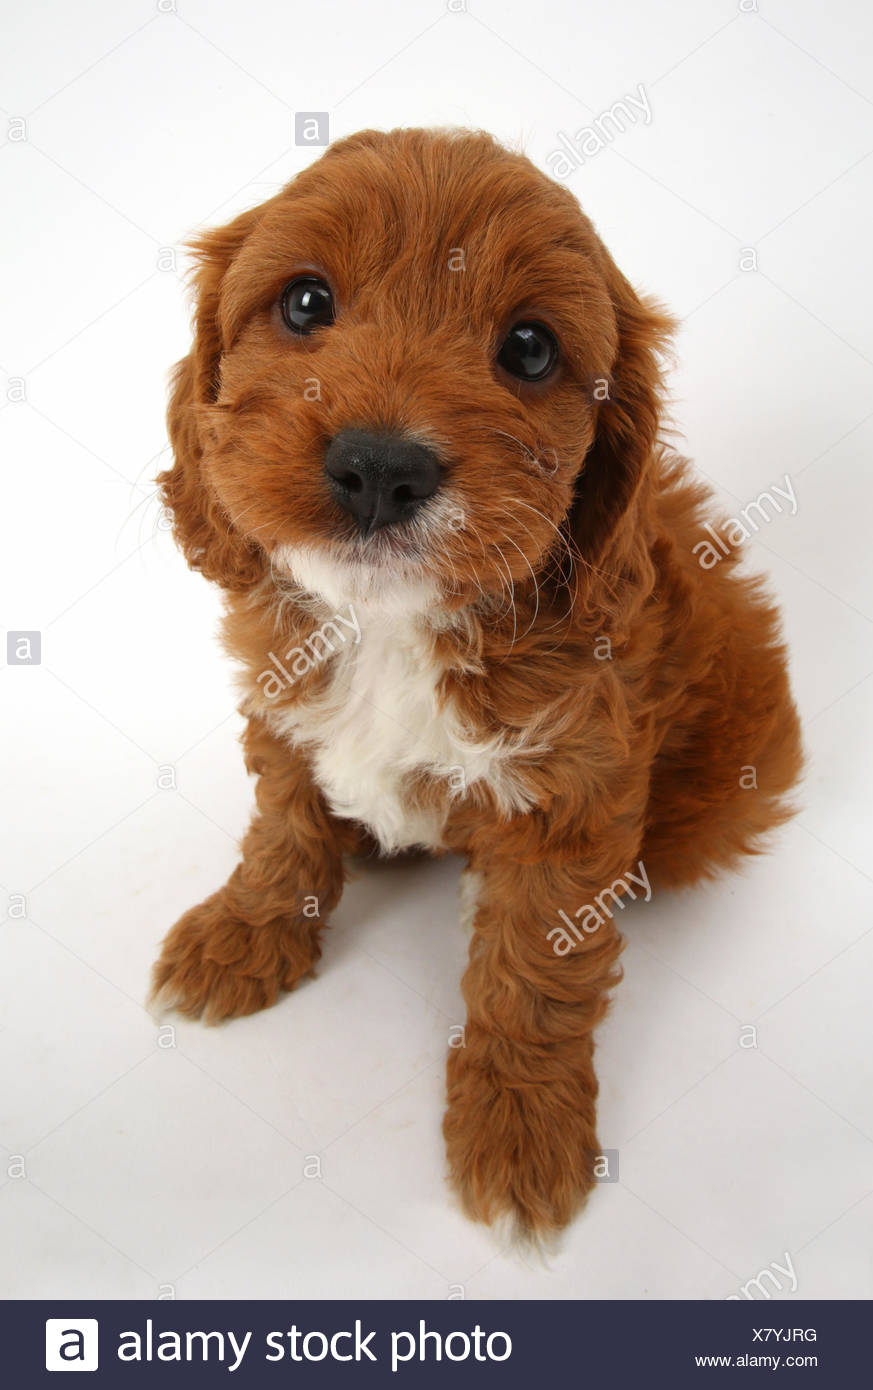 Cavalier King Charles Spaniel X Poodle High Resolution Stock Photography And Images Alamy